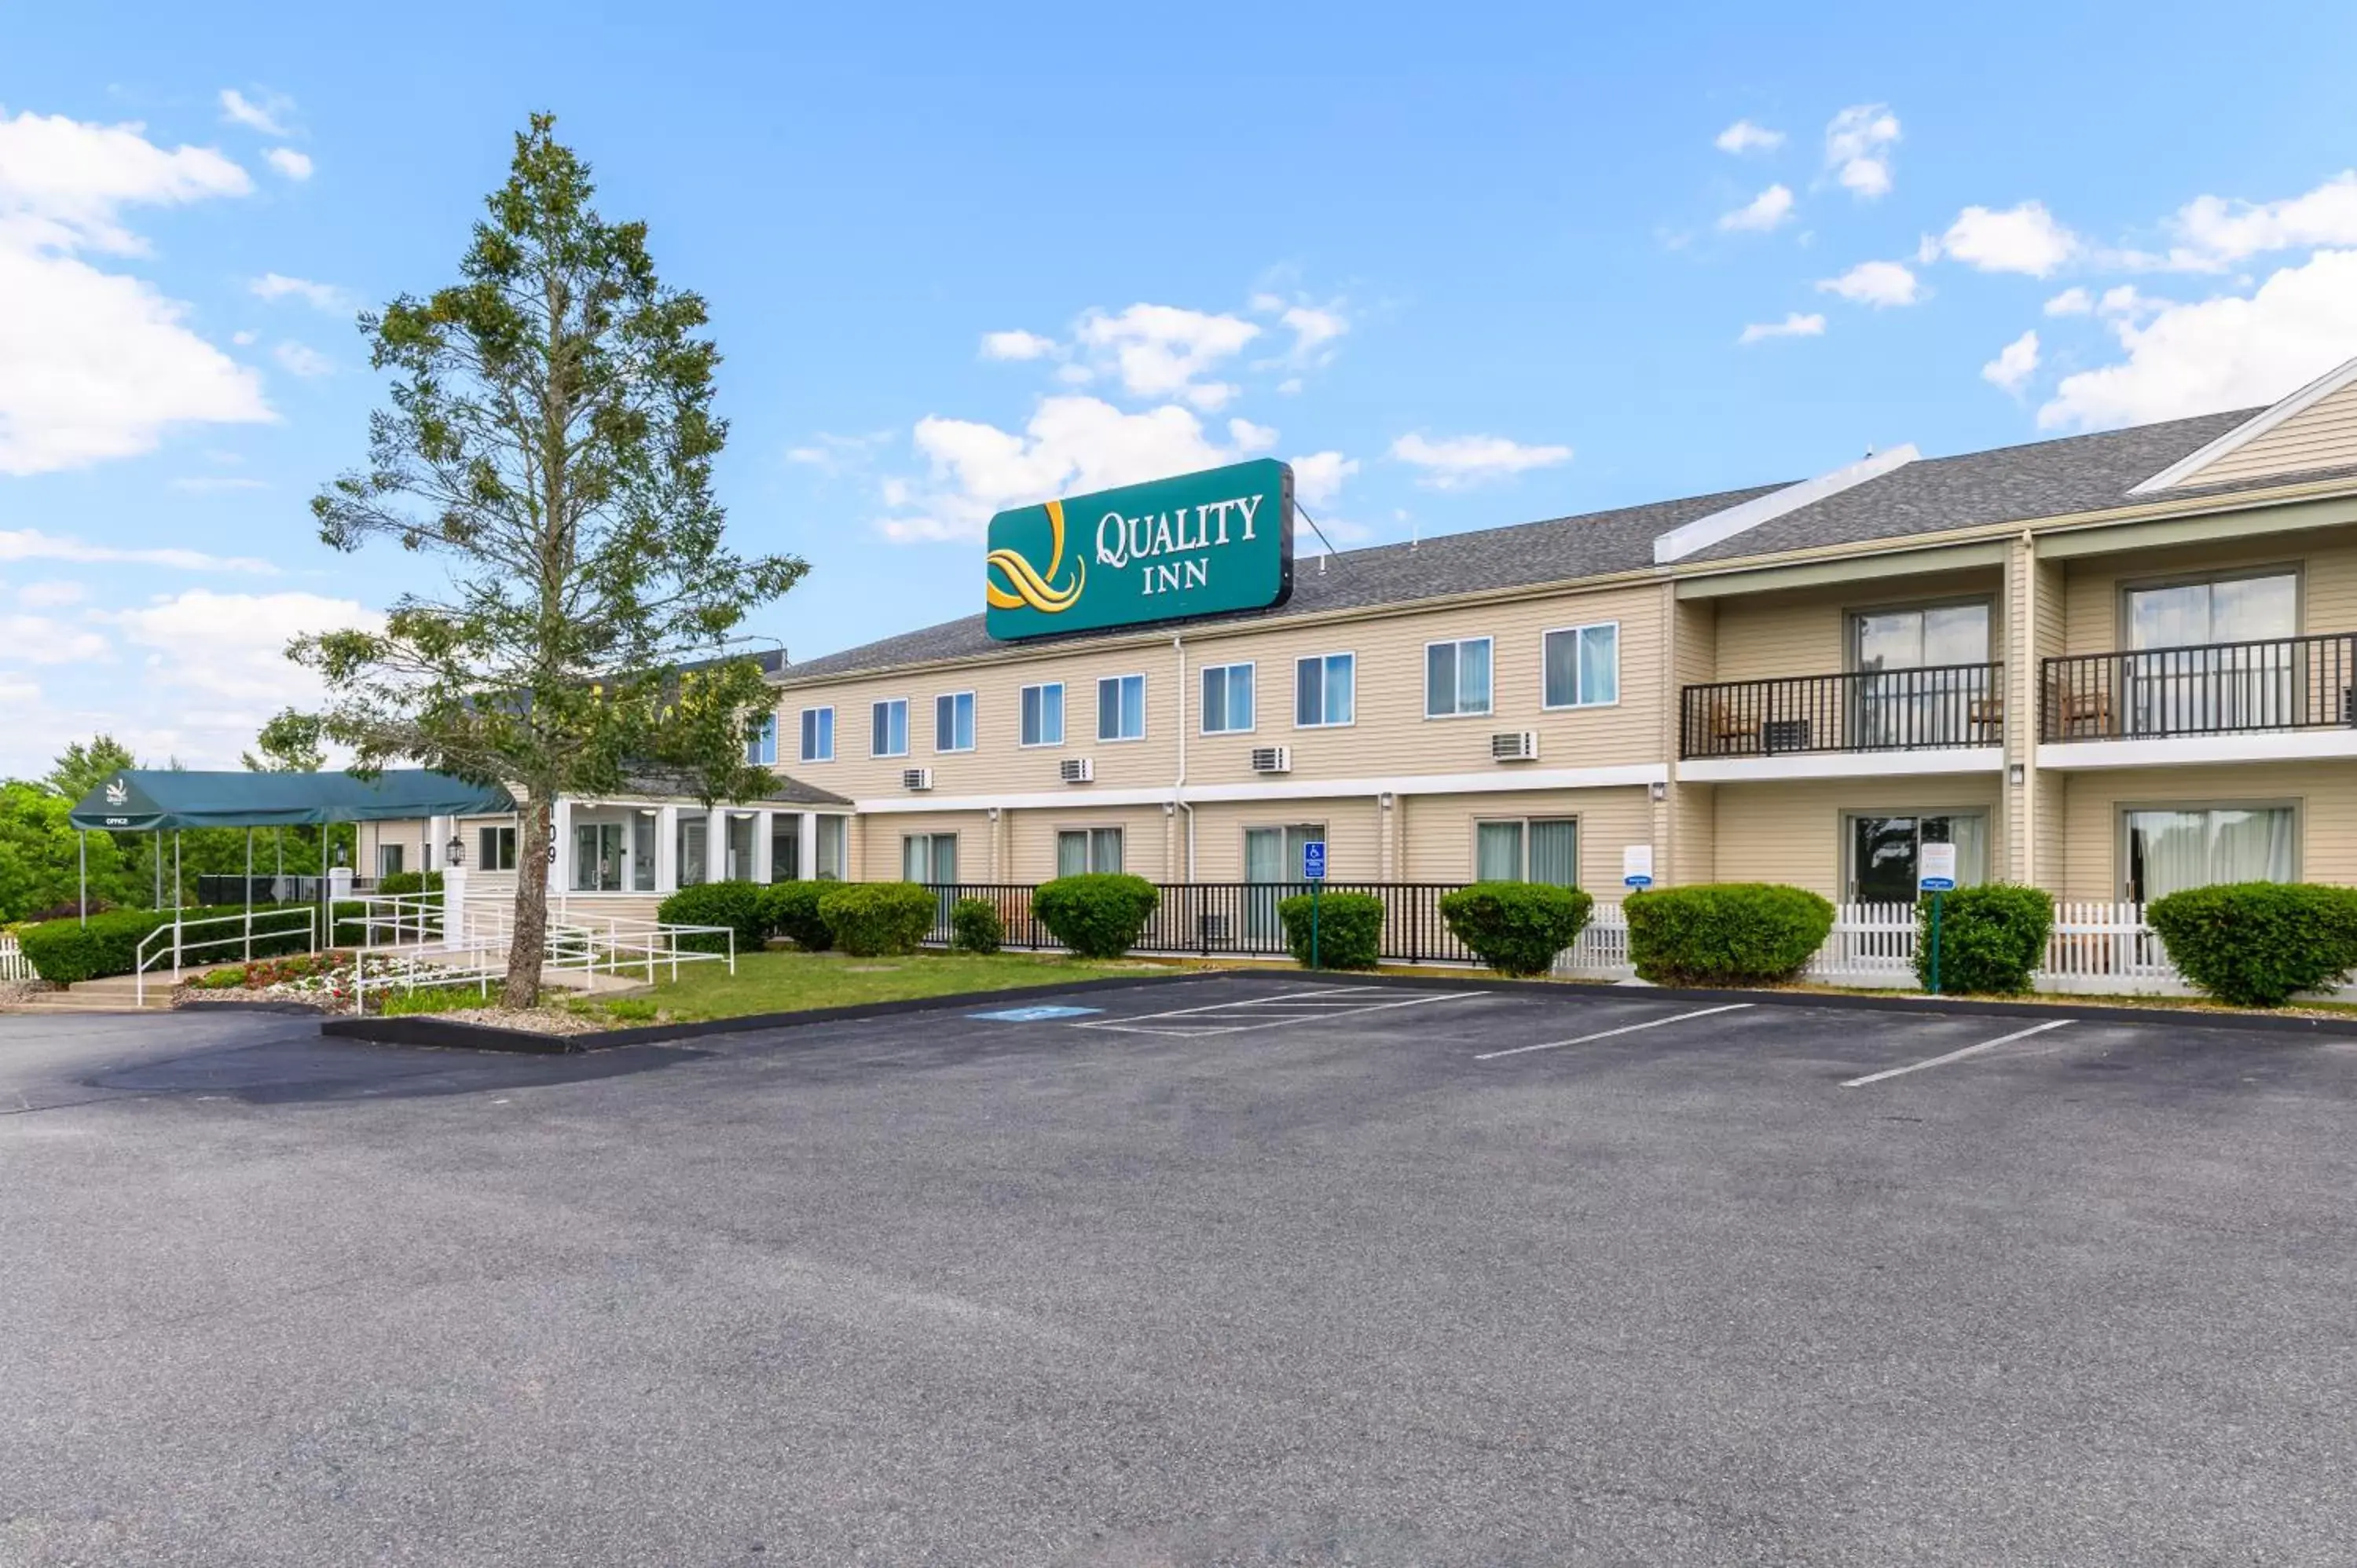 Property Building in Quality Inn Cape Cod